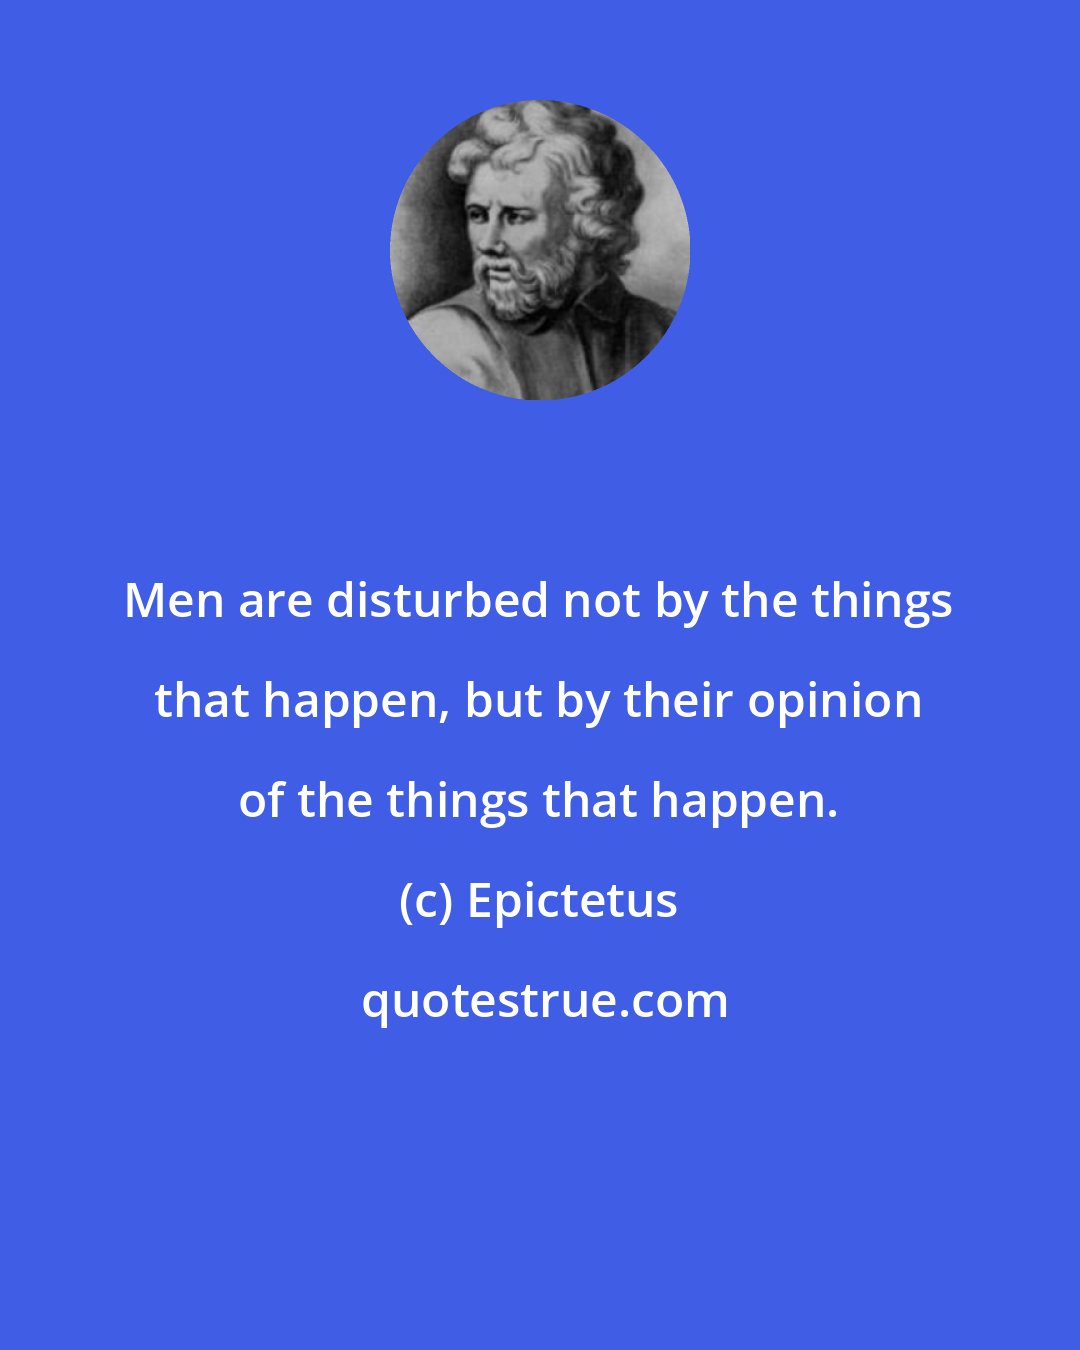 Epictetus: Men are disturbed not by the things that happen, but by their opinion of the things that happen.